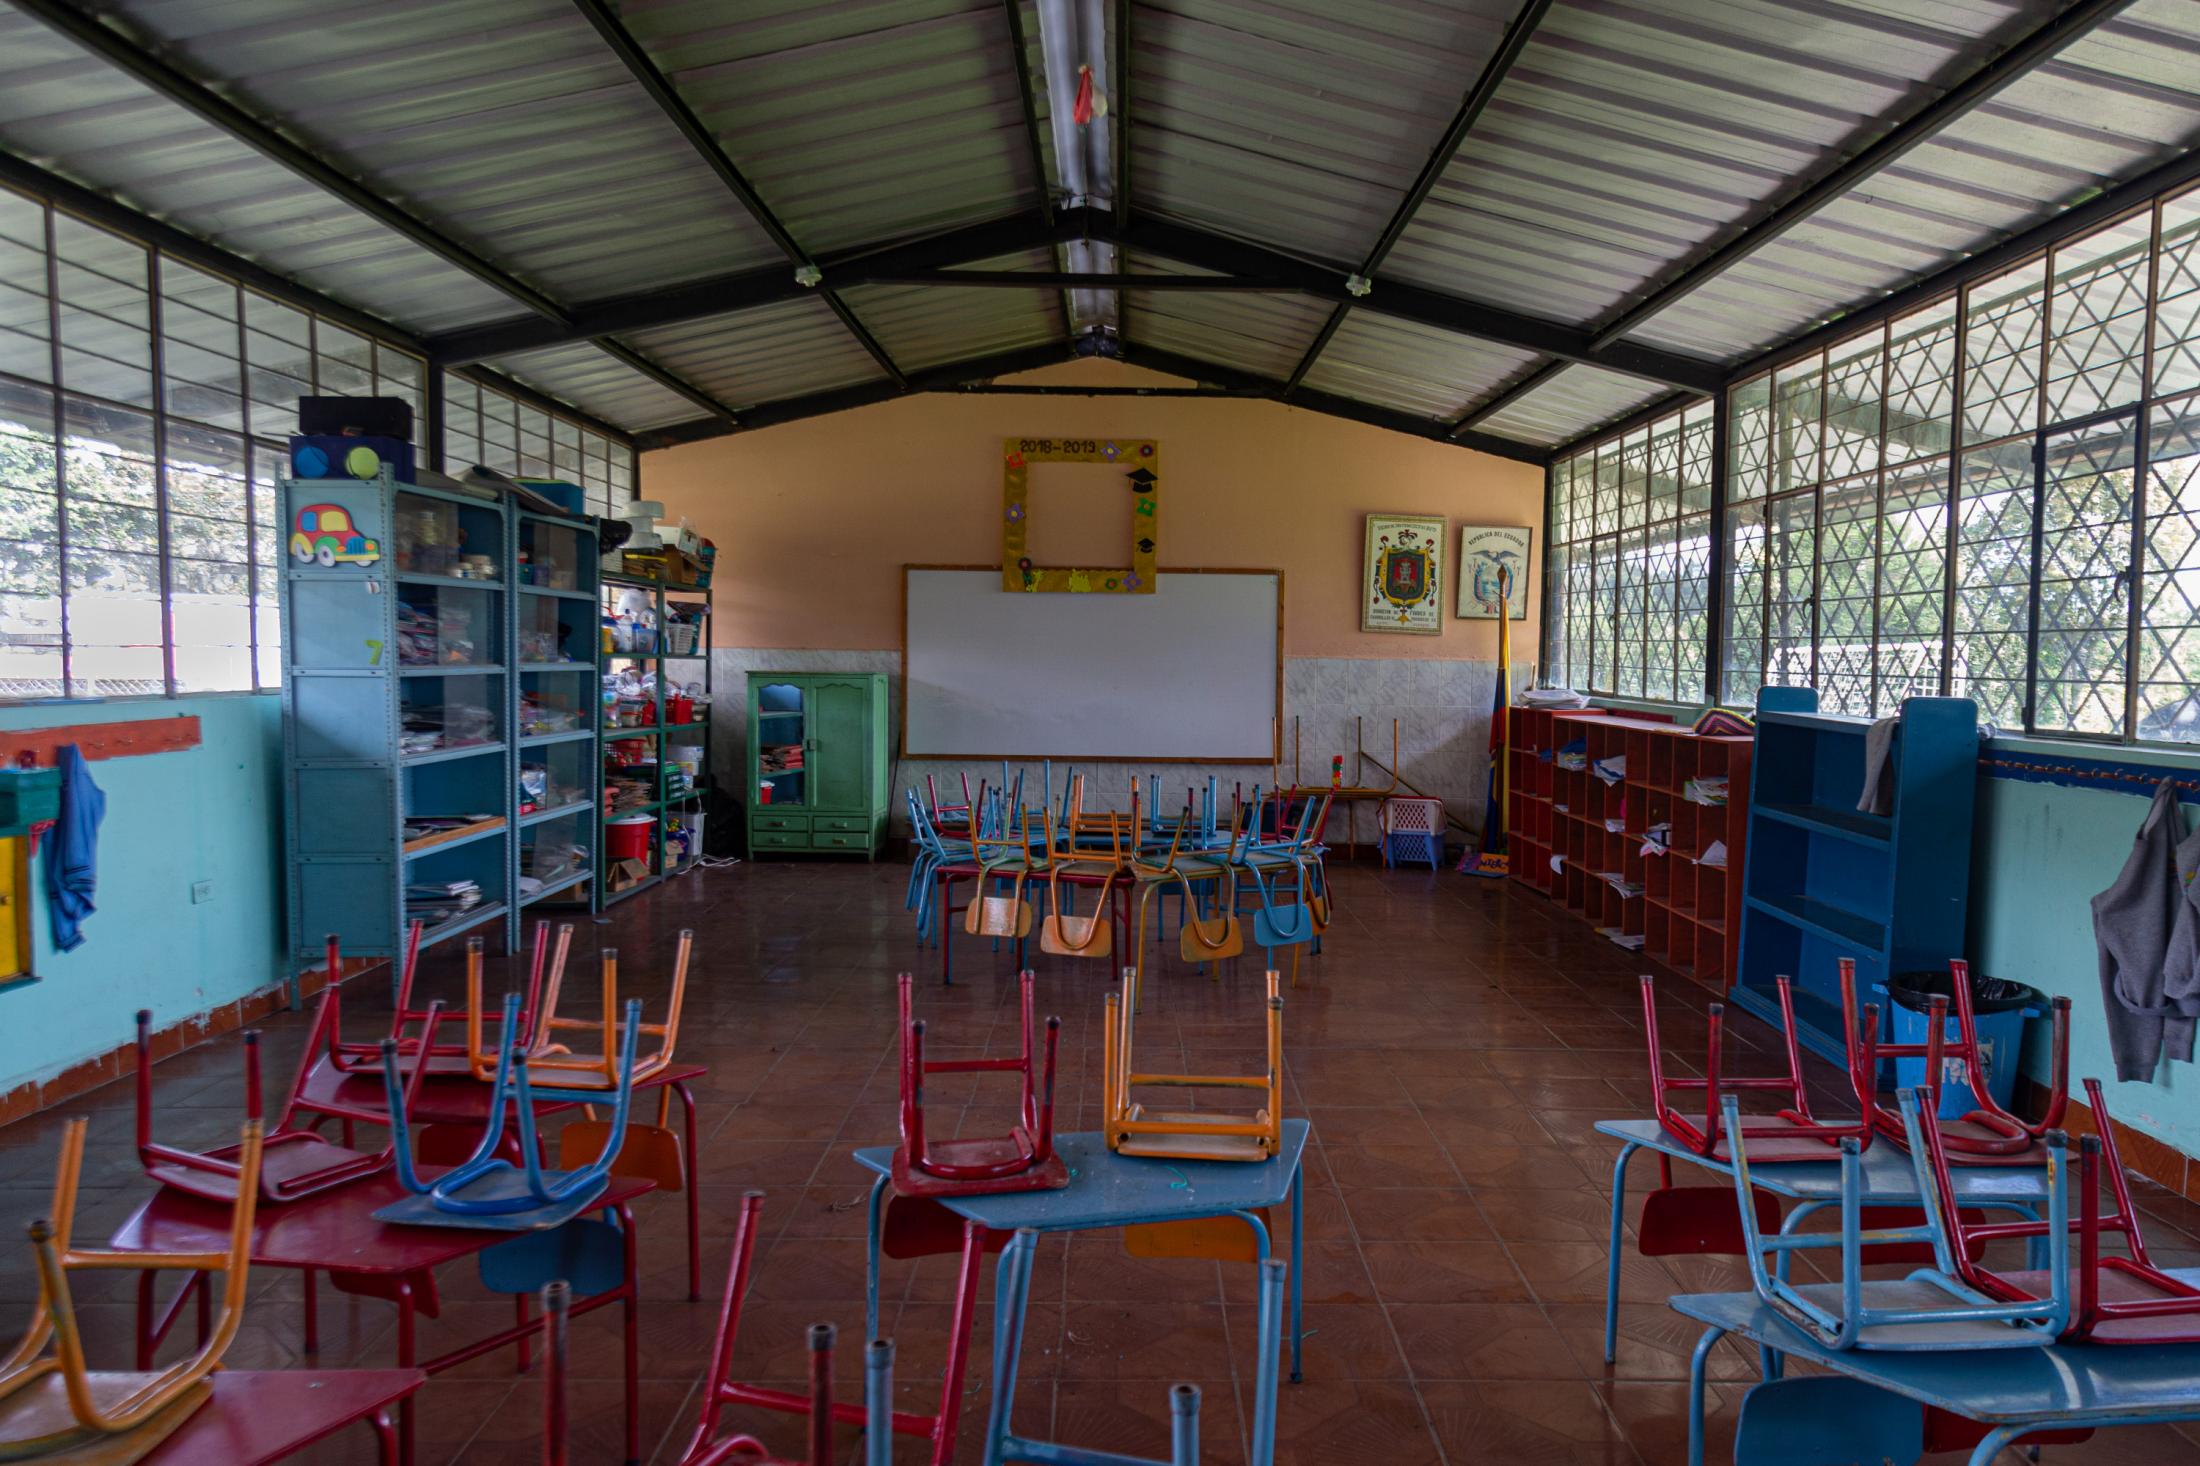 One of the classrooms of Ruperto Alarc&oacute;n Falcon&iacute; Elementary School, in rural parish of Cotogchoa.It is empty, just as it was left on the last day of school, before school attendance was suspended due to the health emergency caused by the COVID-19 virus. July 2, 2020. Cotogchoa-Ecuador. Andr&eacute;s Y&eacute;pez.